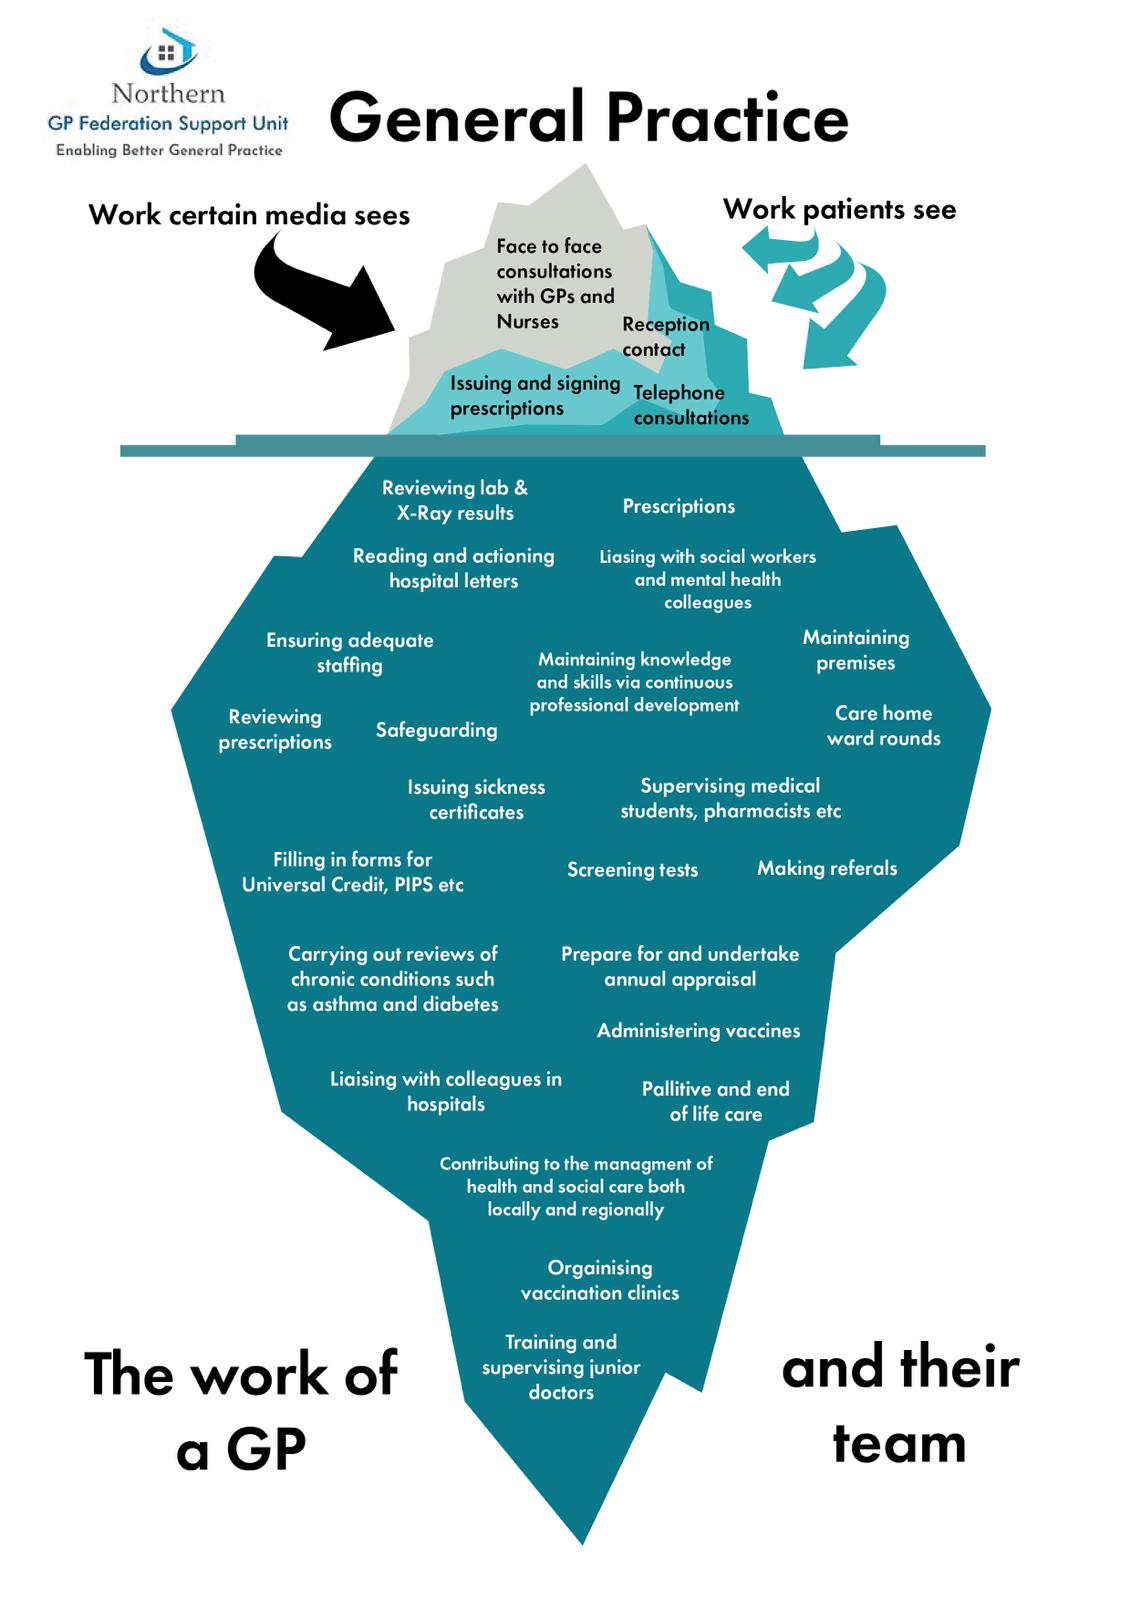 Tip of the Iceberg - Workload in your GP Practice